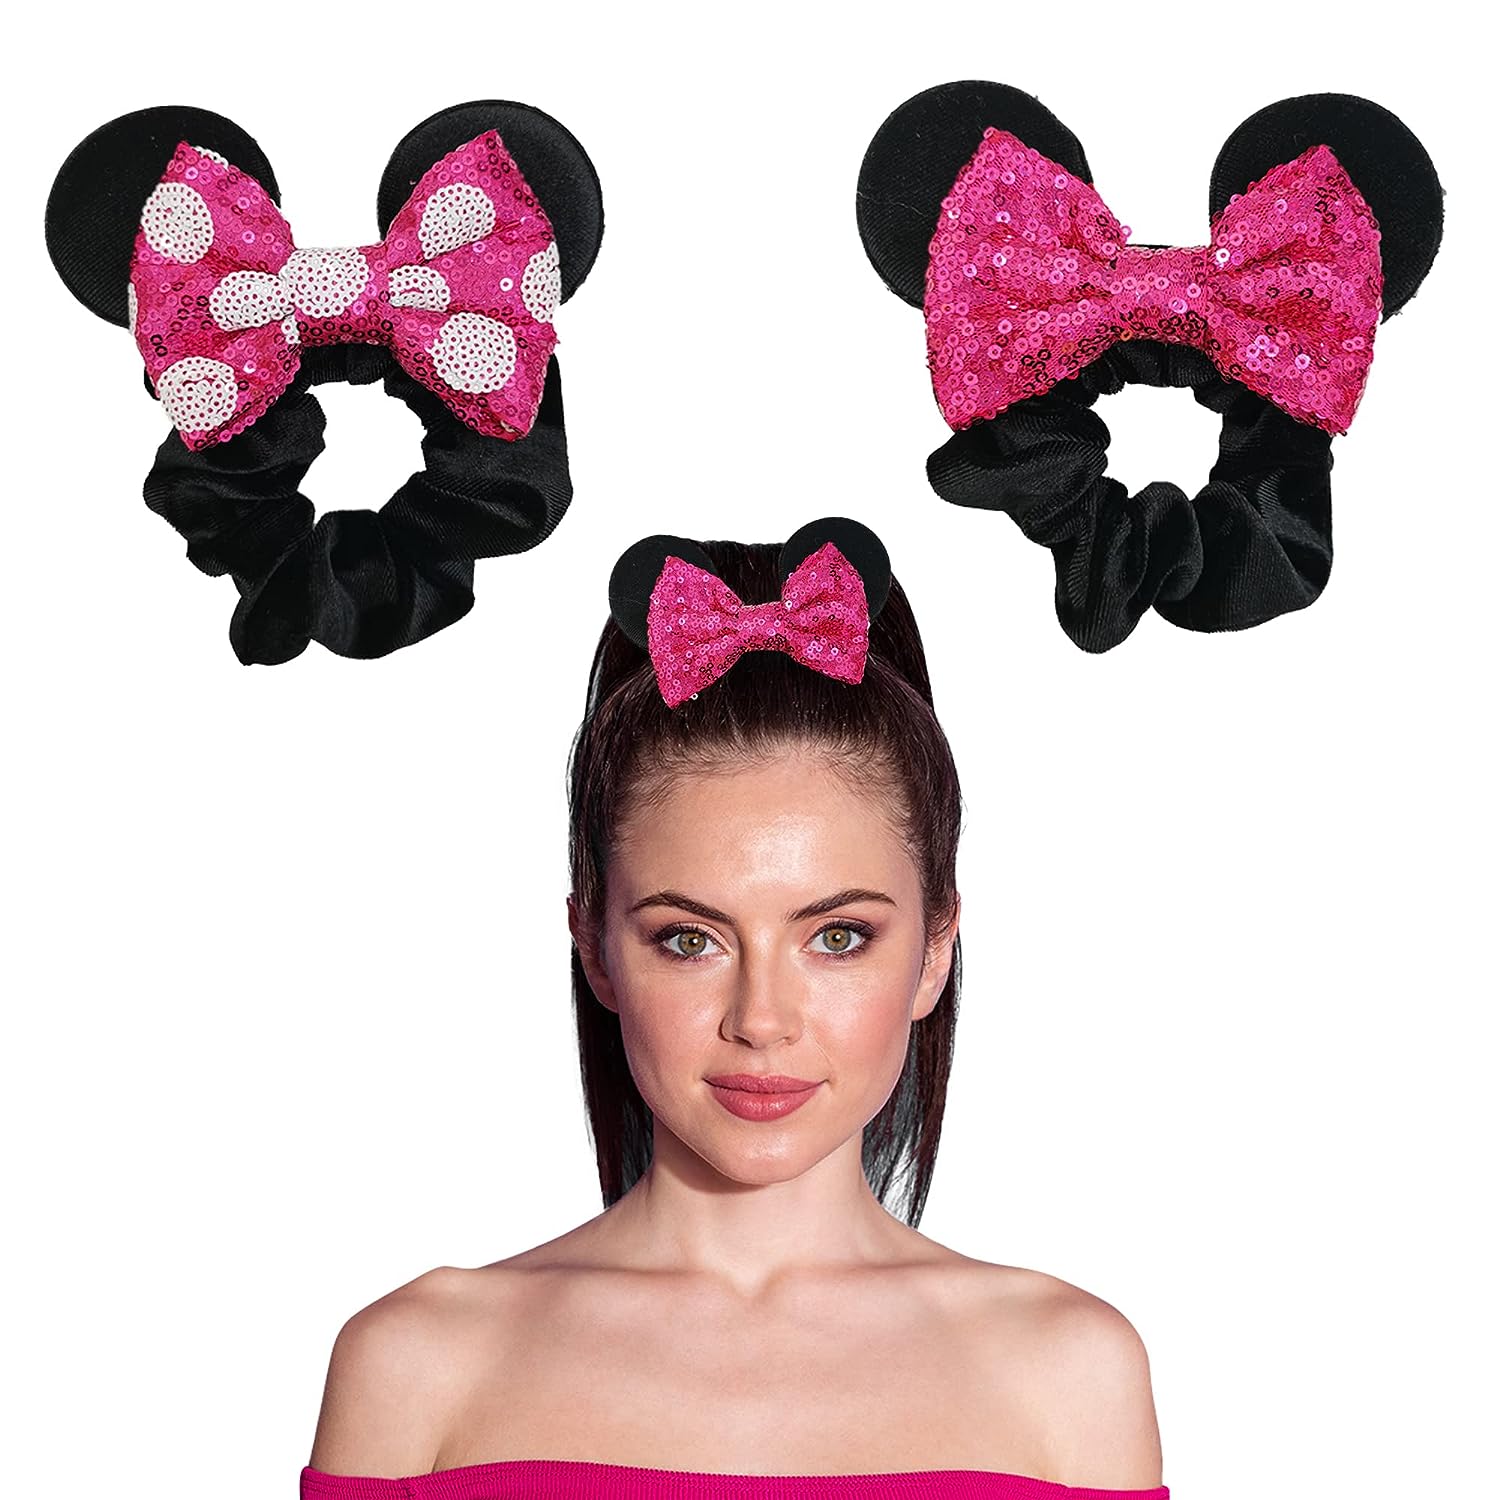 Styla Hair 2pk Mouse Ear Scrunchies for Kids Velvet Hair Bow Scrunchies for Women - Sparkle Sequins Mouse Hair Bands for Mickey Ears (Hot Pink)